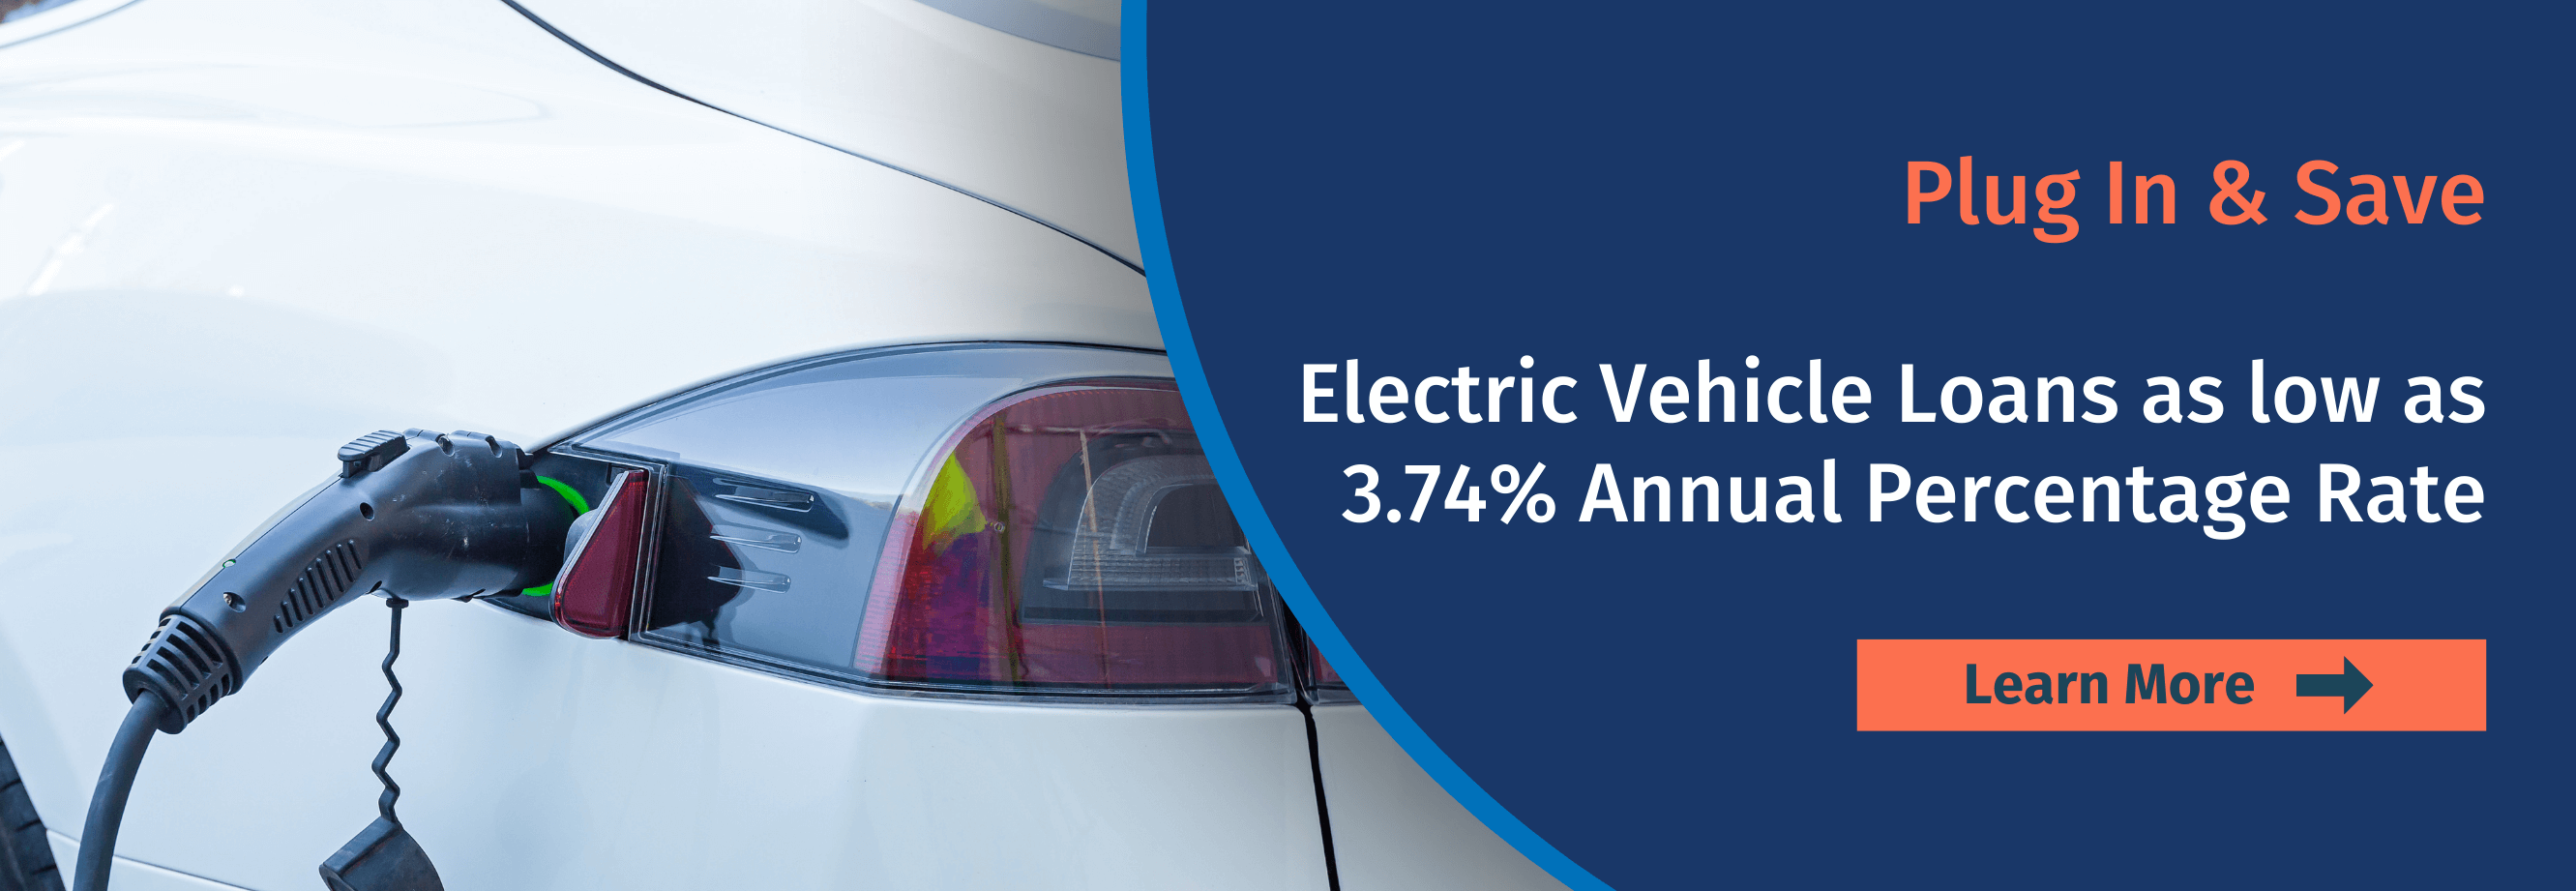 Electric Vehicle Loans